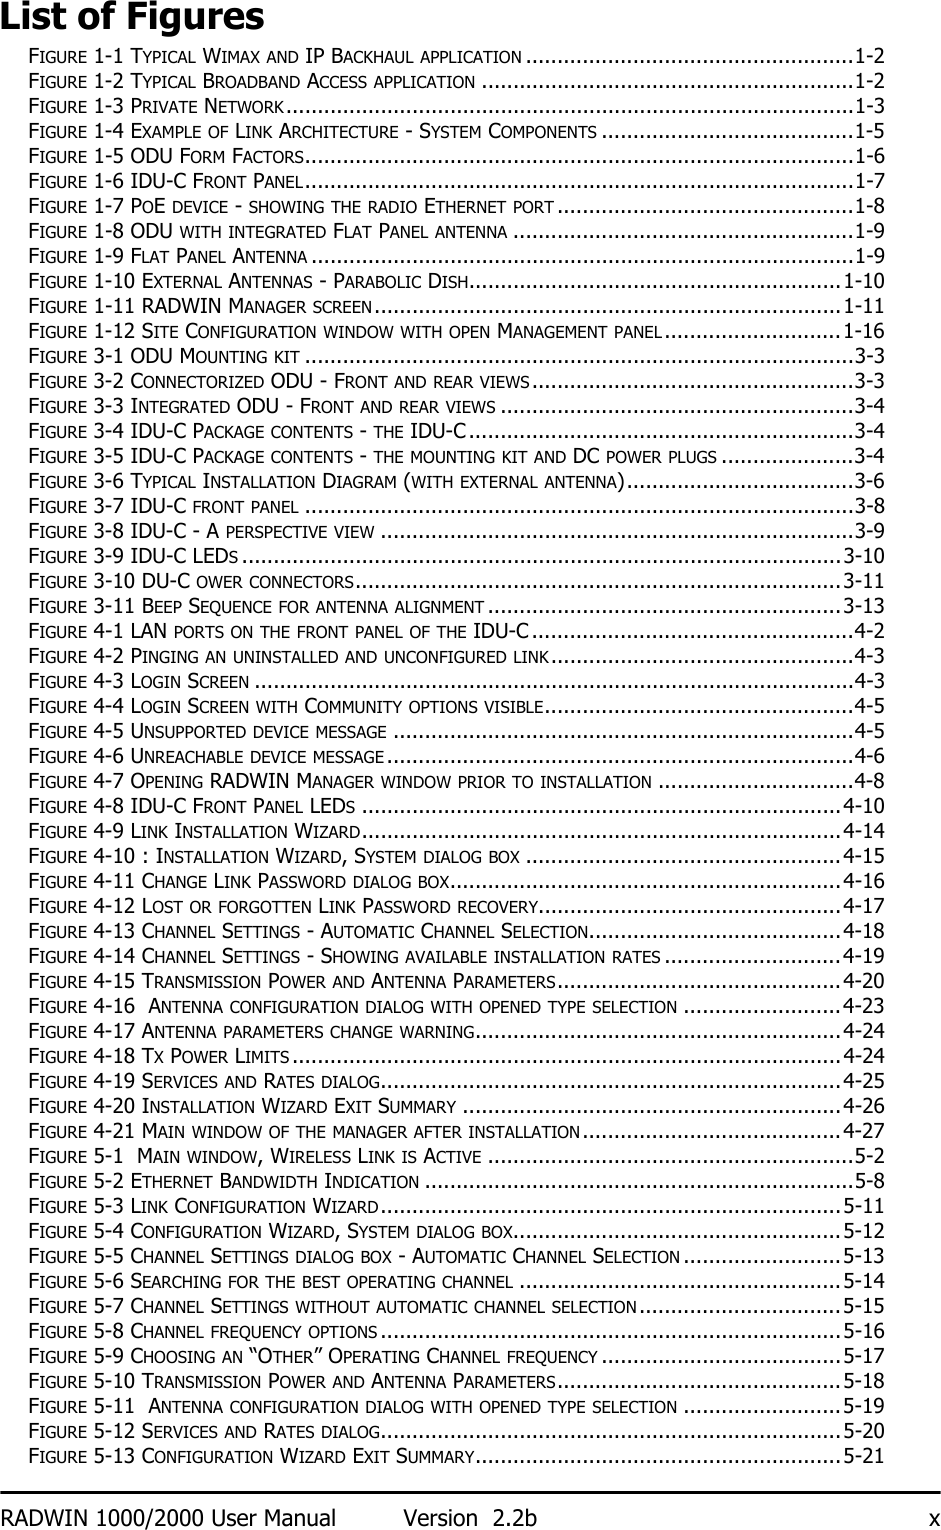 RADWIN 1000/2000 User Manual Version  2.2b xList of FiguresFIGURE 1-1 TYPICAL WIMAX AND IP BACKHAUL APPLICATION ....................................................1-2FIGURE 1-2 TYPICAL BROADBAND ACCESS APPLICATION ...........................................................1-2FIGURE 1-3 PRIVATE NETWORK..........................................................................................1-3FIGURE 1-4 EXAMPLE OF LINK ARCHITECTURE - SYSTEM COMPONENTS ........................................1-5FIGURE 1-5 ODU FORM FACTORS.......................................................................................1-6FIGURE 1-6 IDU-C FRONT PANEL.......................................................................................1-7FIGURE 1-7 POE DEVICE - SHOWING THE RADIO ETHERNET PORT ...............................................1-8FIGURE 1-8 ODU WITH INTEGRATED FLAT PANEL ANTENNA ......................................................1-9FIGURE 1-9 FLAT PANEL ANTENNA ......................................................................................1-9FIGURE 1-10 EXTERNAL ANTENNAS - PARABOLIC DISH...........................................................1-10FIGURE 1-11 RADWIN MANAGER SCREEN..........................................................................1-11FIGURE 1-12 SITE CONFIGURATION WINDOW WITH OPEN MANAGEMENT PANEL............................1-16FIGURE 3-1 ODU MOUNTING KIT .......................................................................................3-3FIGURE 3-2 CONNECTORIZED ODU - FRONT AND REAR VIEWS...................................................3-3FIGURE 3-3 INTEGRATED ODU - FRONT AND REAR VIEWS ........................................................3-4FIGURE 3-4 IDU-C PACKAGE CONTENTS - THE IDU-C .............................................................3-4FIGURE 3-5 IDU-C PACKAGE CONTENTS - THE MOUNTING KIT AND DC POWER PLUGS .....................3-4FIGURE 3-6 TYPICAL INSTALLATION DIAGRAM (WITH EXTERNAL ANTENNA)....................................3-6FIGURE 3-7 IDU-C FRONT PANEL .......................................................................................3-8FIGURE 3-8 IDU-C - A PERSPECTIVE VIEW ...........................................................................3-9FIGURE 3-9 IDU-C LEDS...............................................................................................3-10FIGURE 3-10 DU-C OWER CONNECTORS.............................................................................3-11FIGURE 3-11 BEEP SEQUENCE FOR ANTENNA ALIGNMENT ........................................................3-13FIGURE 4-1 LAN PORTS ON THE FRONT PANEL OF THE IDU-C ...................................................4-2FIGURE 4-2 PINGING AN UNINSTALLED AND UNCONFIGURED LINK................................................4-3FIGURE 4-3 LOGIN SCREEN ...............................................................................................4-3FIGURE 4-4 LOGIN SCREEN WITH COMMUNITY OPTIONS VISIBLE.................................................4-5FIGURE 4-5 UNSUPPORTED DEVICE MESSAGE .........................................................................4-5FIGURE 4-6 UNREACHABLE DEVICE MESSAGE ..........................................................................4-6FIGURE 4-7 OPENING RADWIN MANAGER WINDOW PRIOR TO INSTALLATION ...............................4-8FIGURE 4-8 IDU-C FRONT PANEL LEDS............................................................................4-10FIGURE 4-9 LINK INSTALLATION WIZARD............................................................................4-14FIGURE 4-10 : INSTALLATION WIZARD, SYSTEM DIALOG BOX ..................................................4-15FIGURE 4-11 CHANGE LINK PASSWORD DIALOG BOX..............................................................4-16FIGURE 4-12 LOST OR FORGOTTEN LINK PASSWORD RECOVERY................................................4-17FIGURE 4-13 CHANNEL SETTINGS - AUTOMATIC CHANNEL SELECTION........................................4-18FIGURE 4-14 CHANNEL SETTINGS - SHOWING AVAILABLE INSTALLATION RATES ............................4-19FIGURE 4-15 TRANSMISSION POWER AND ANTENNA PARAMETERS.............................................4-20FIGURE 4-16  ANTENNA CONFIGURATION DIALOG WITH OPENED TYPE SELECTION .........................4-23FIGURE 4-17 ANTENNA PARAMETERS CHANGE WARNING..........................................................4-24FIGURE 4-18 TX POWER LIMITS .......................................................................................4-24FIGURE 4-19 SERVICES AND RATES DIALOG.........................................................................4-25FIGURE 4-20 INSTALLATION WIZARD EXIT SUMMARY ............................................................4-26FIGURE 4-21 MAIN WINDOW OF THE MANAGER AFTER INSTALLATION.........................................4-27FIGURE 5-1  MAIN WINDOW, WIRELESS LINK IS ACTIVE ..........................................................5-2FIGURE 5-2 ETHERNET BANDWIDTH INDICATION ....................................................................5-8FIGURE 5-3 LINK CONFIGURATION WIZARD.........................................................................5-11FIGURE 5-4 CONFIGURATION WIZARD, SYSTEM DIALOG BOX....................................................5-12FIGURE 5-5 CHANNEL SETTINGS DIALOG BOX - AUTOMATIC CHANNEL SELECTION .........................5-13FIGURE 5-6 SEARCHING FOR THE BEST OPERATING CHANNEL ...................................................5-14FIGURE 5-7 CHANNEL SETTINGS WITHOUT AUTOMATIC CHANNEL SELECTION................................5-15FIGURE 5-8 CHANNEL FREQUENCY OPTIONS .........................................................................5-16FIGURE 5-9 CHOOSING AN “OTHER” OPERATING CHANNEL FREQUENCY ......................................5-17FIGURE 5-10 TRANSMISSION POWER AND ANTENNA PARAMETERS.............................................5-18FIGURE 5-11  ANTENNA CONFIGURATION DIALOG WITH OPENED TYPE SELECTION .........................5-19FIGURE 5-12 SERVICES AND RATES DIALOG.........................................................................5-20FIGURE 5-13 CONFIGURATION WIZARD EXIT SUMMARY..........................................................5-21